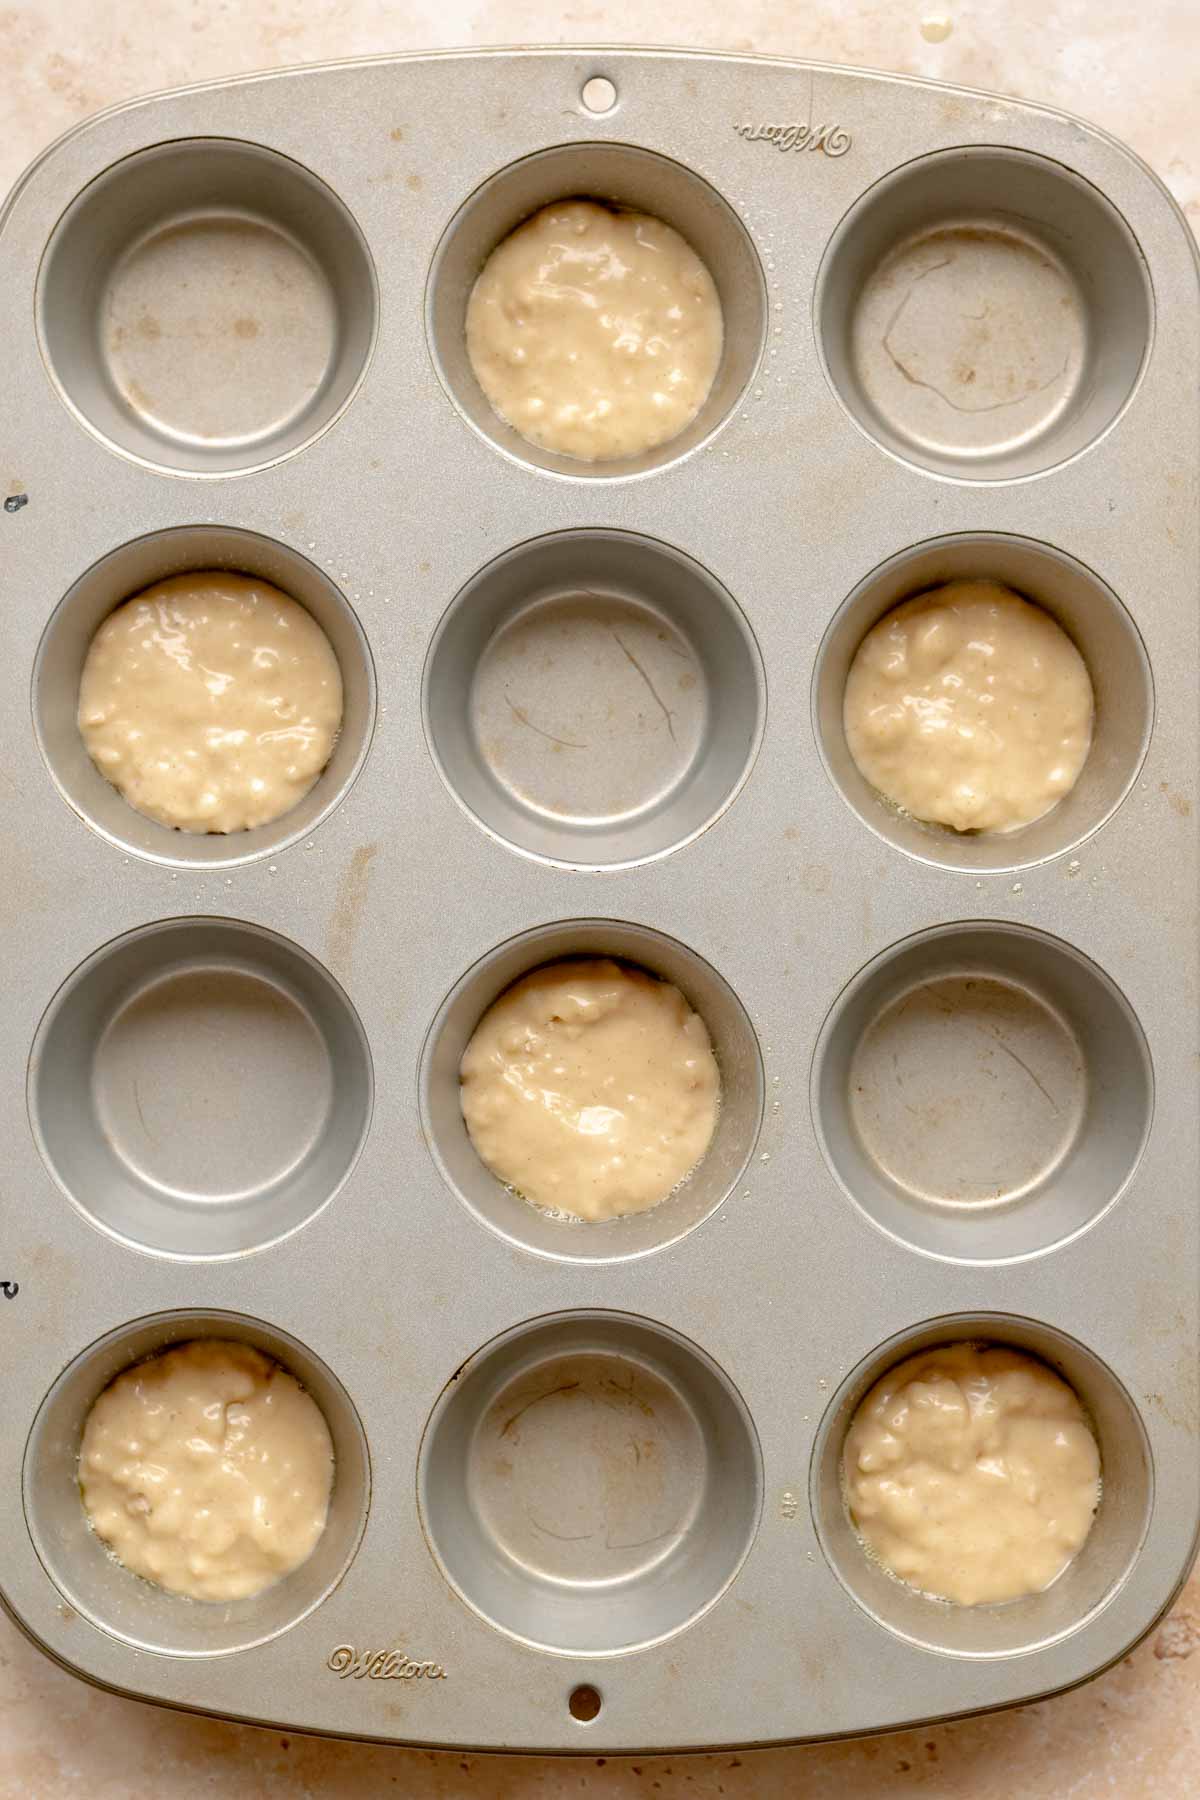 A small amount of batter in a muffin tin.